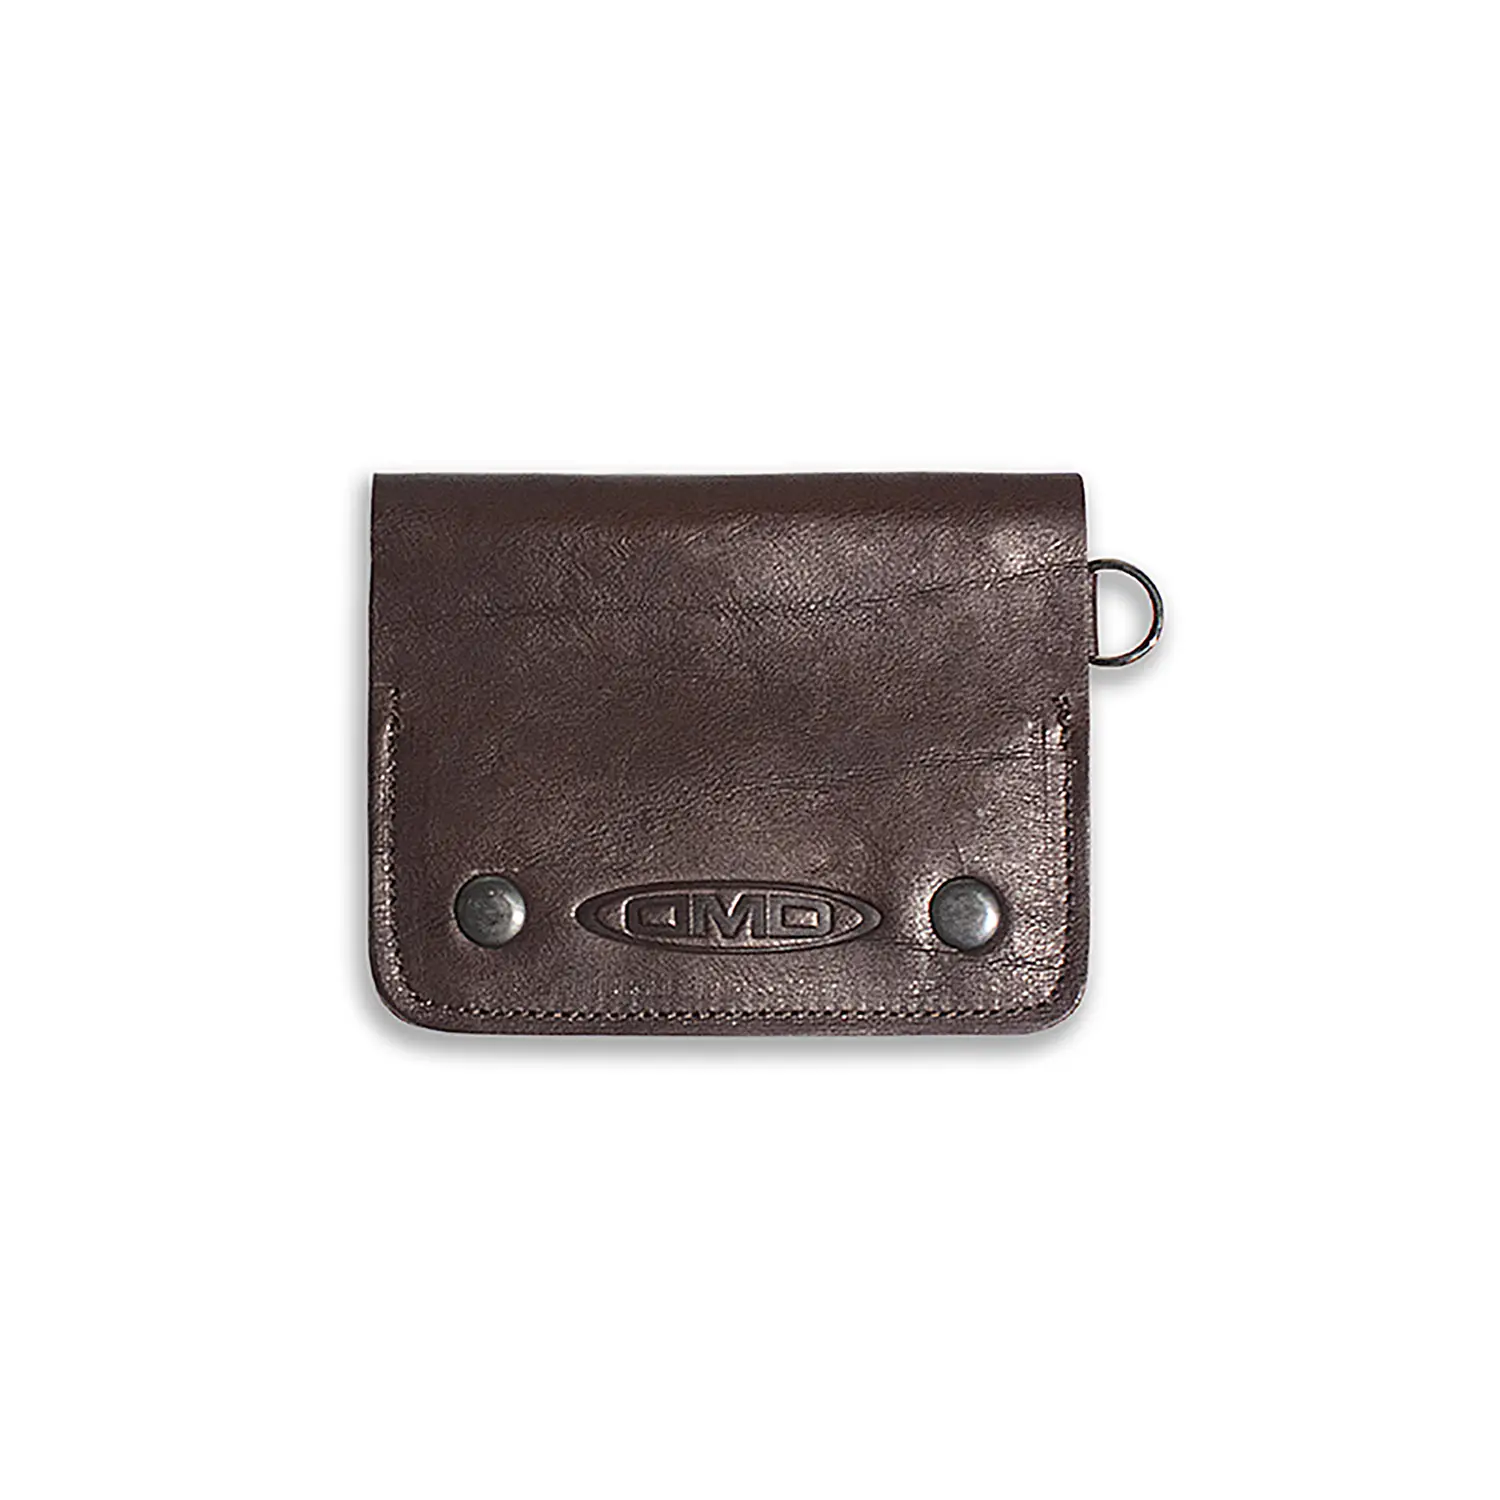 dmd.eu - WALLET WITH CHAIN RING DMD – Portafoglio a catena – front